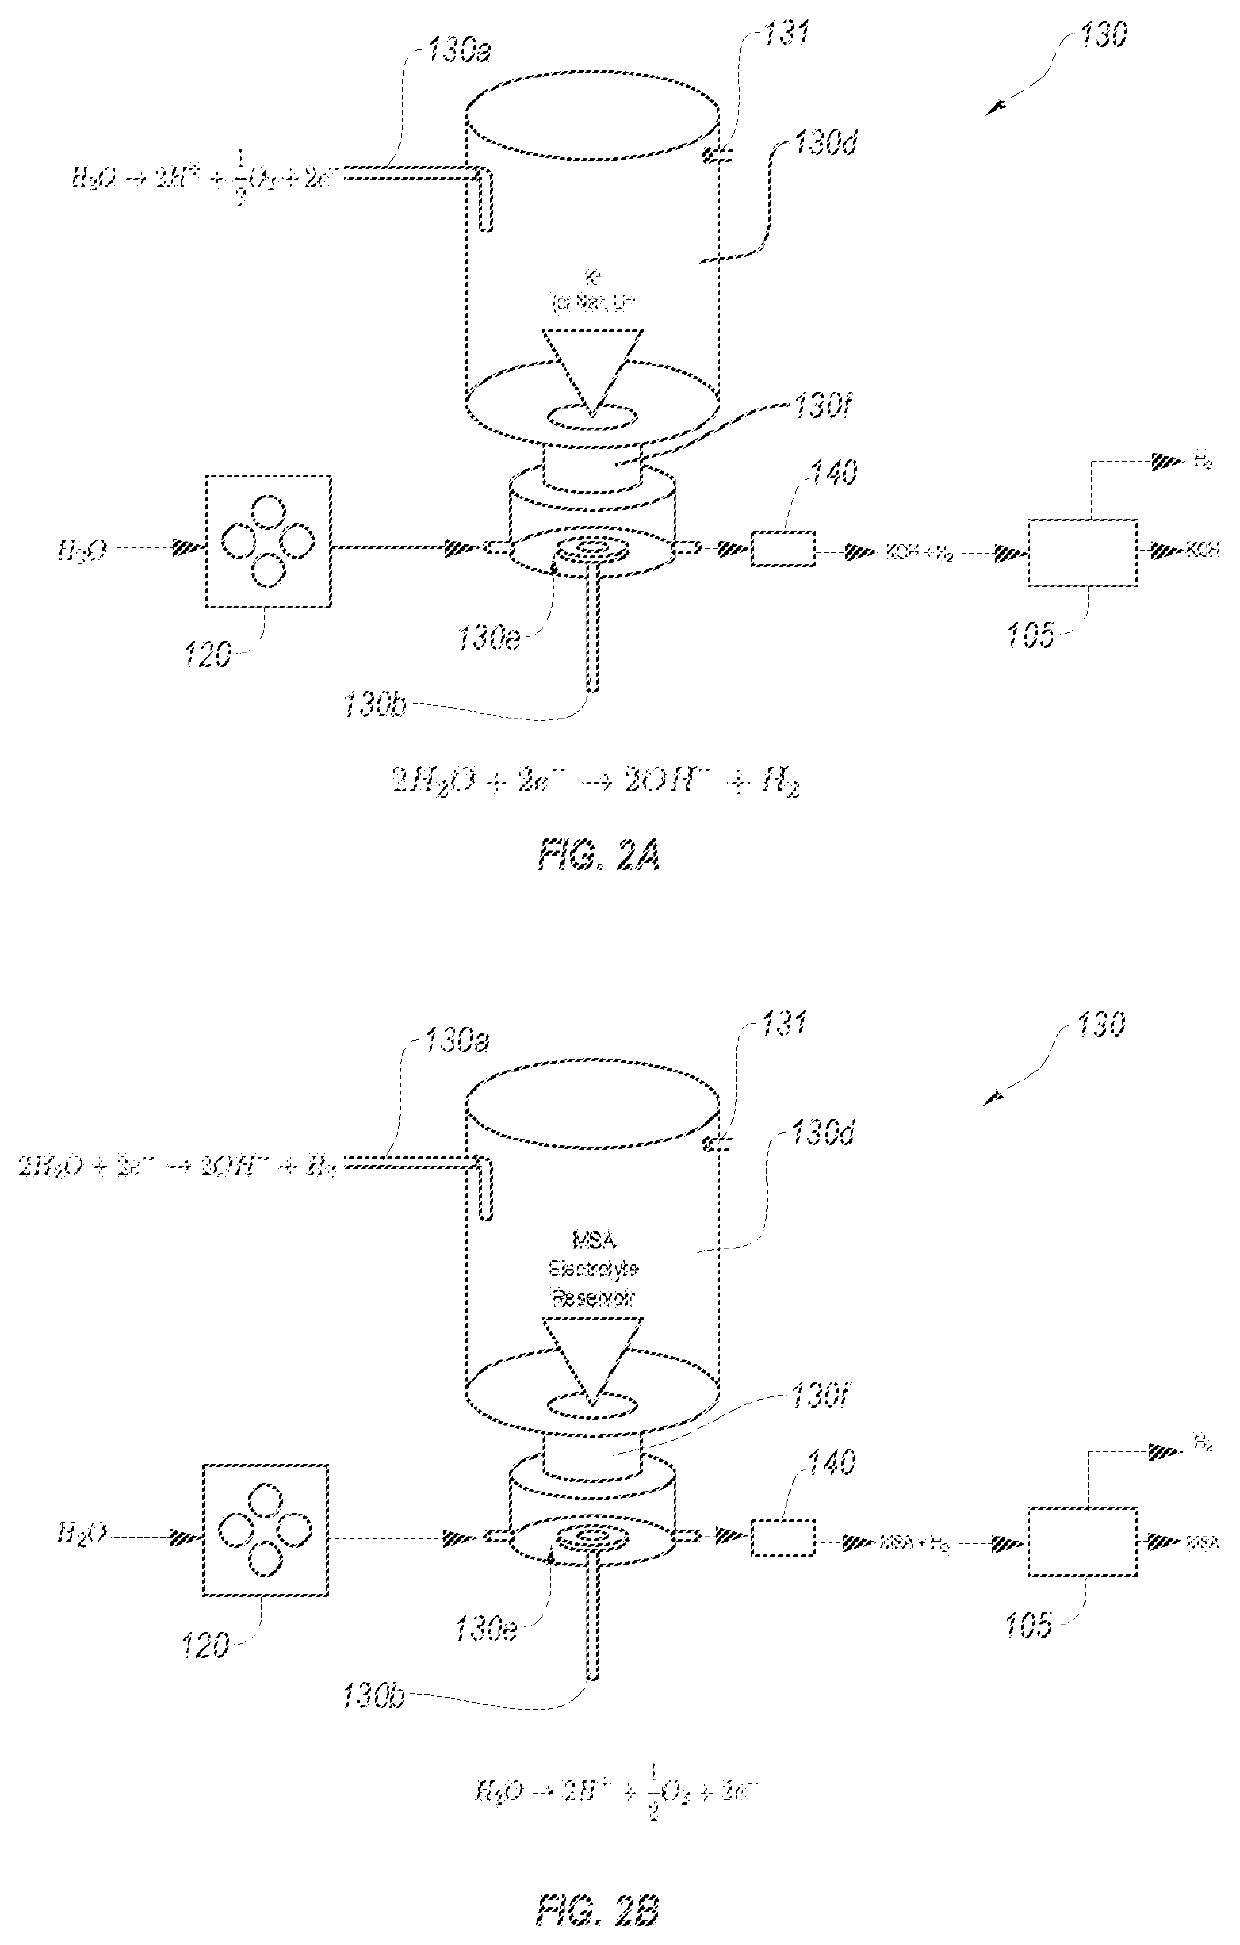 Fast startup ion chromatography system and methods